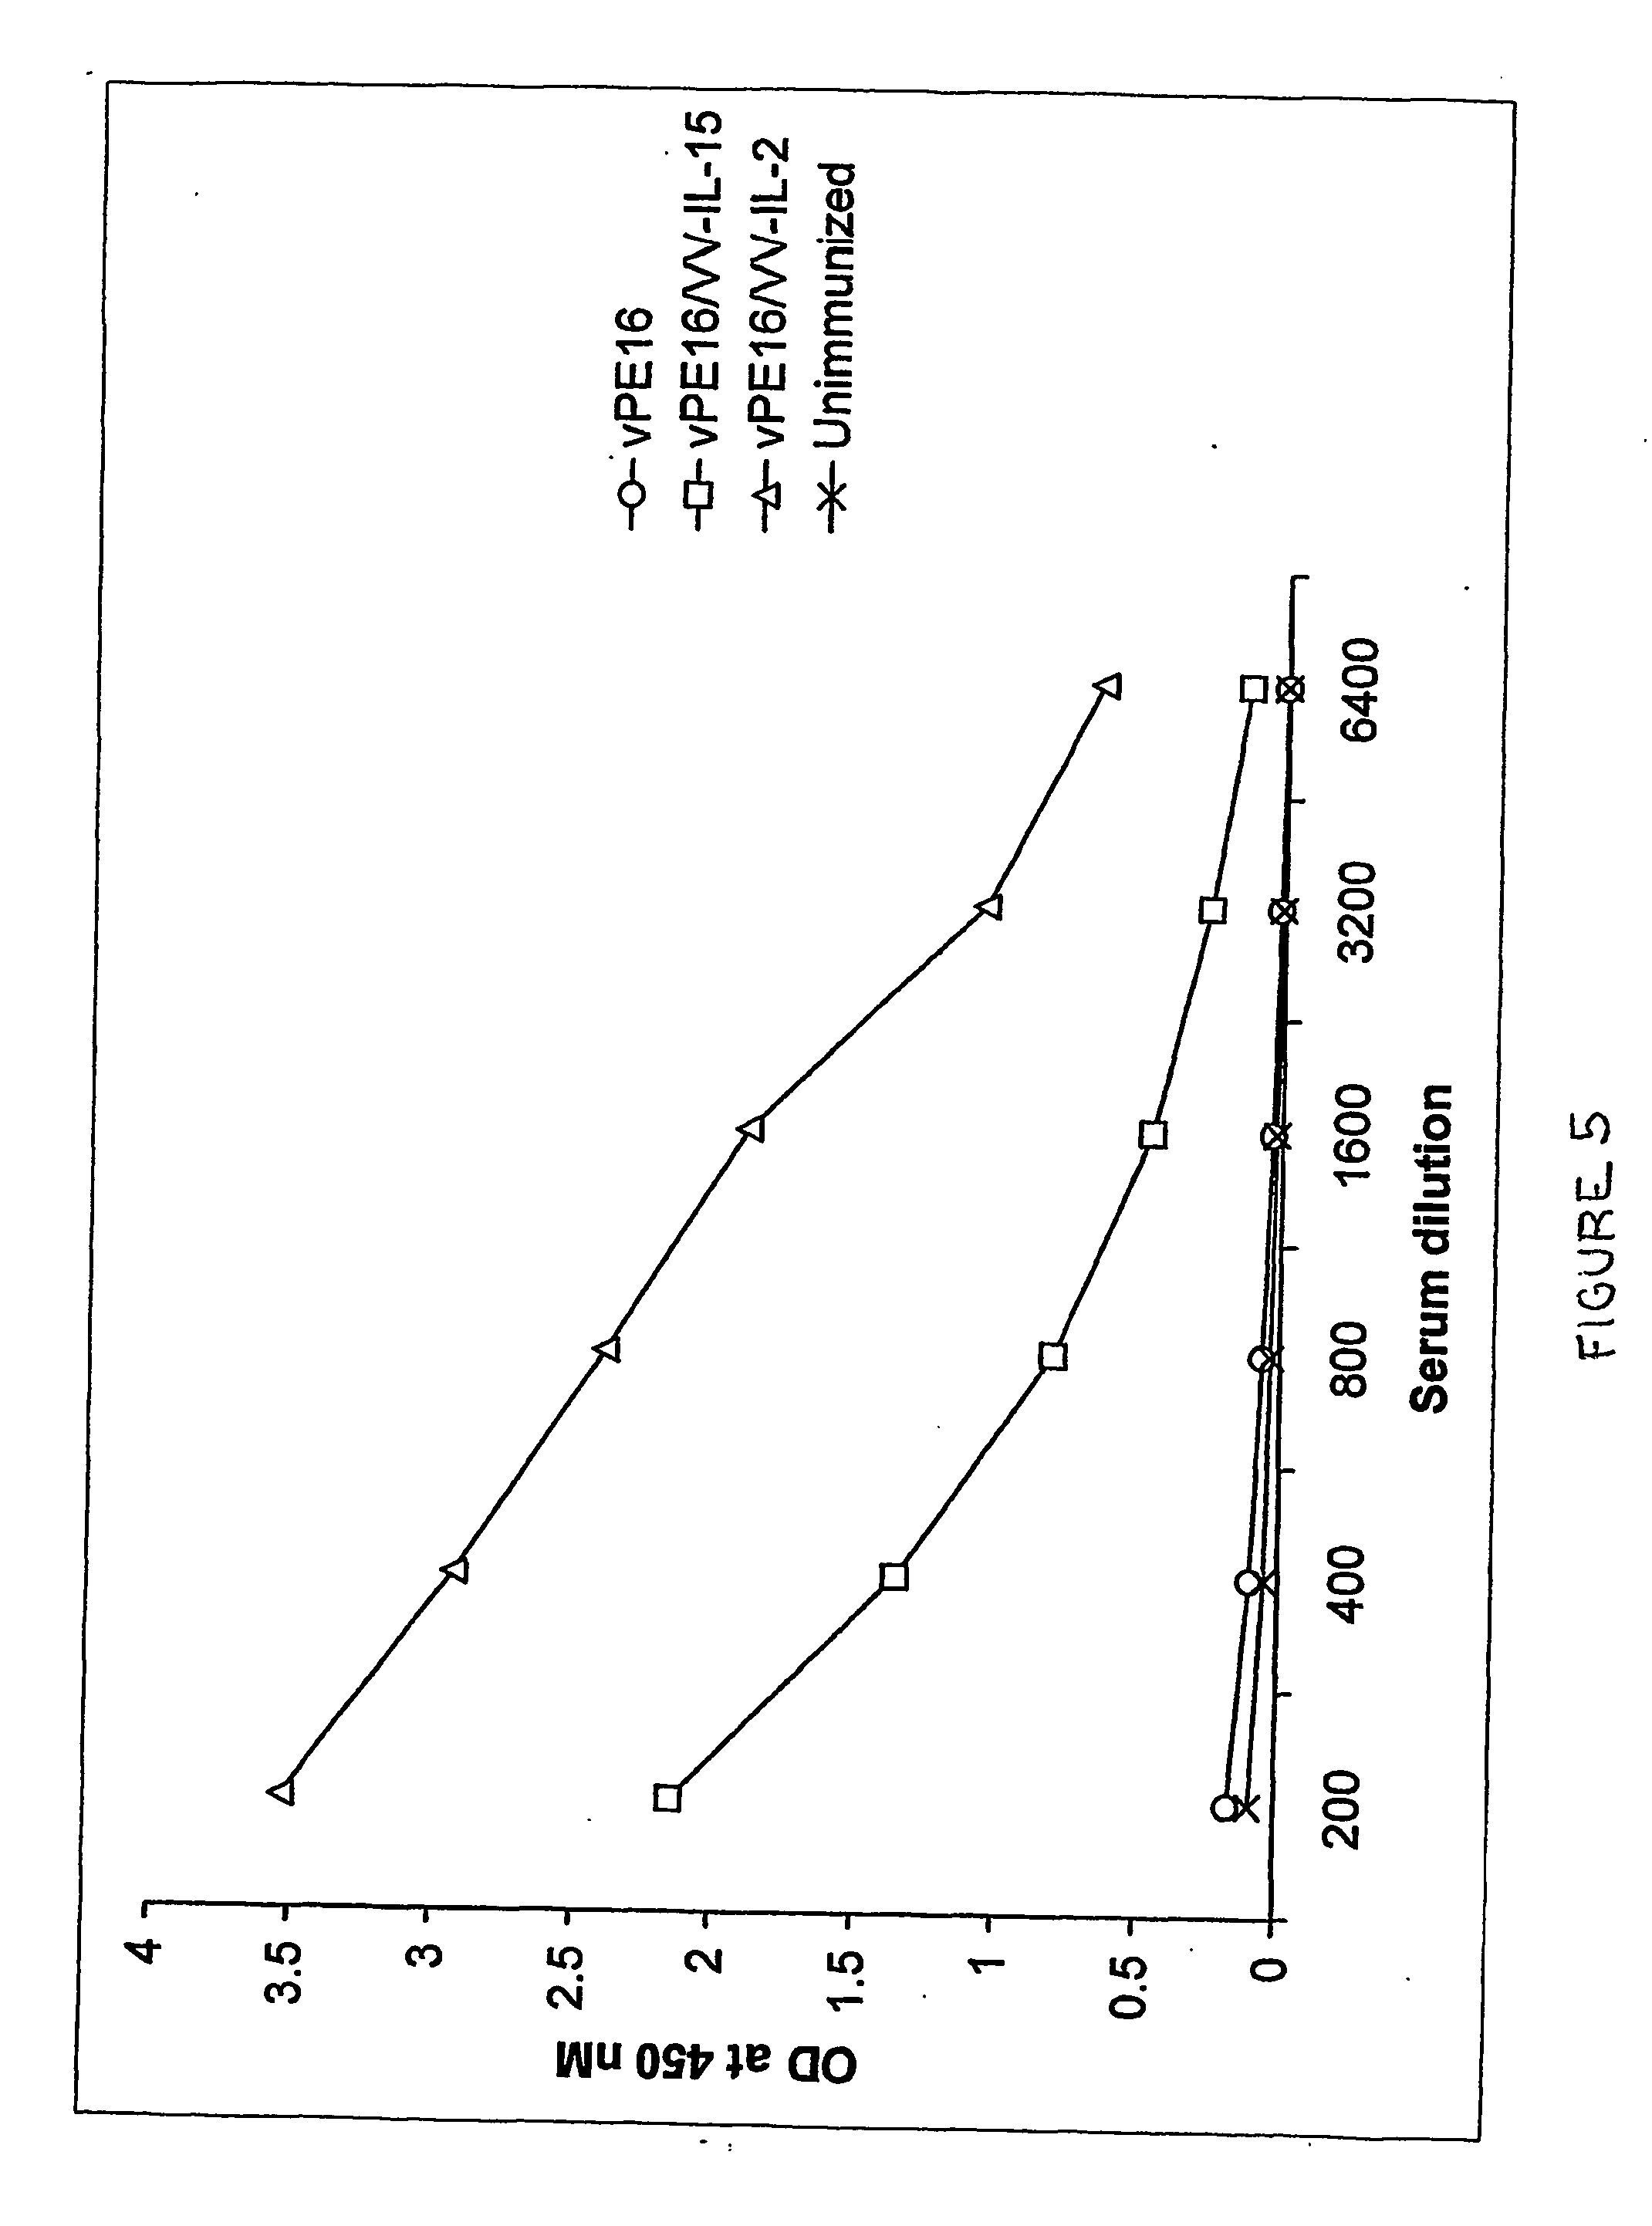 Recombinant vaccine viruses expressing il-15 and methods of using the same